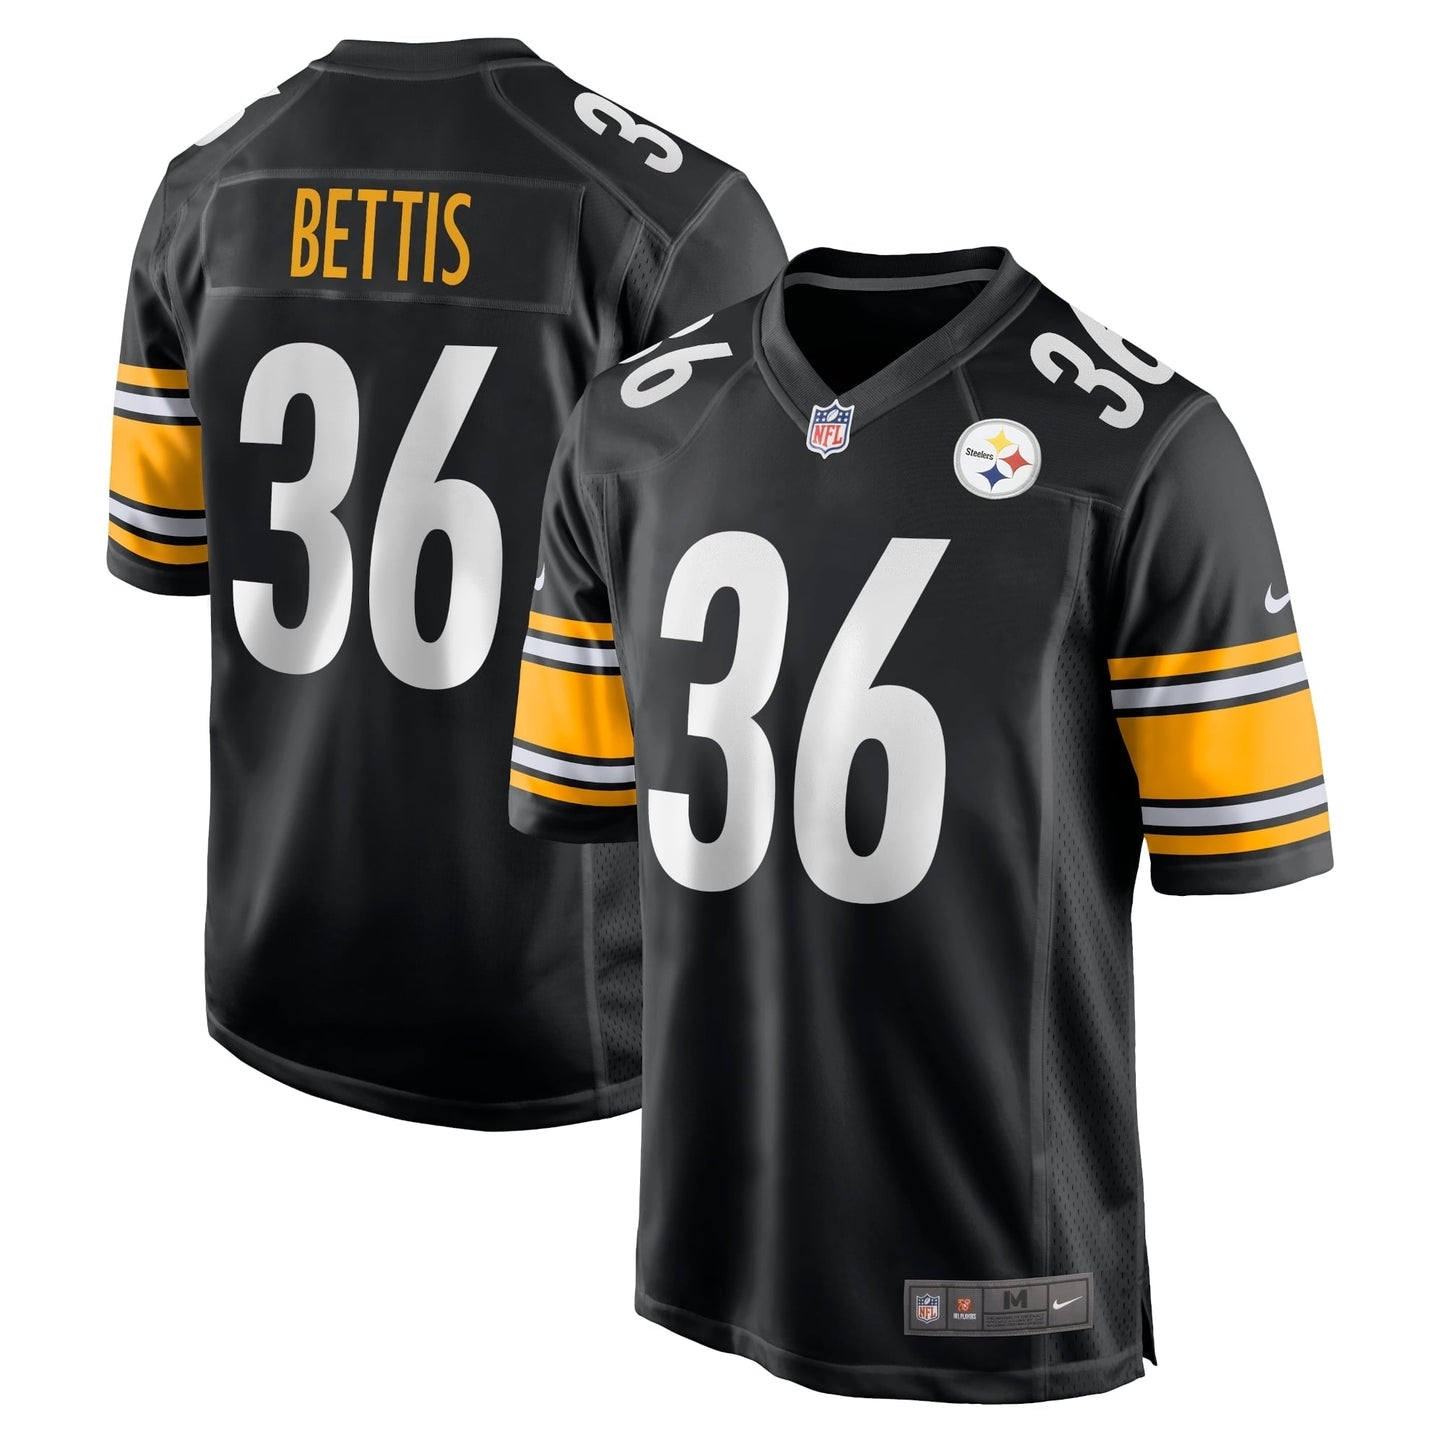 Men's Nike Jerome Bettis Black Pittsburgh Steelers Retired Player Game Jersey